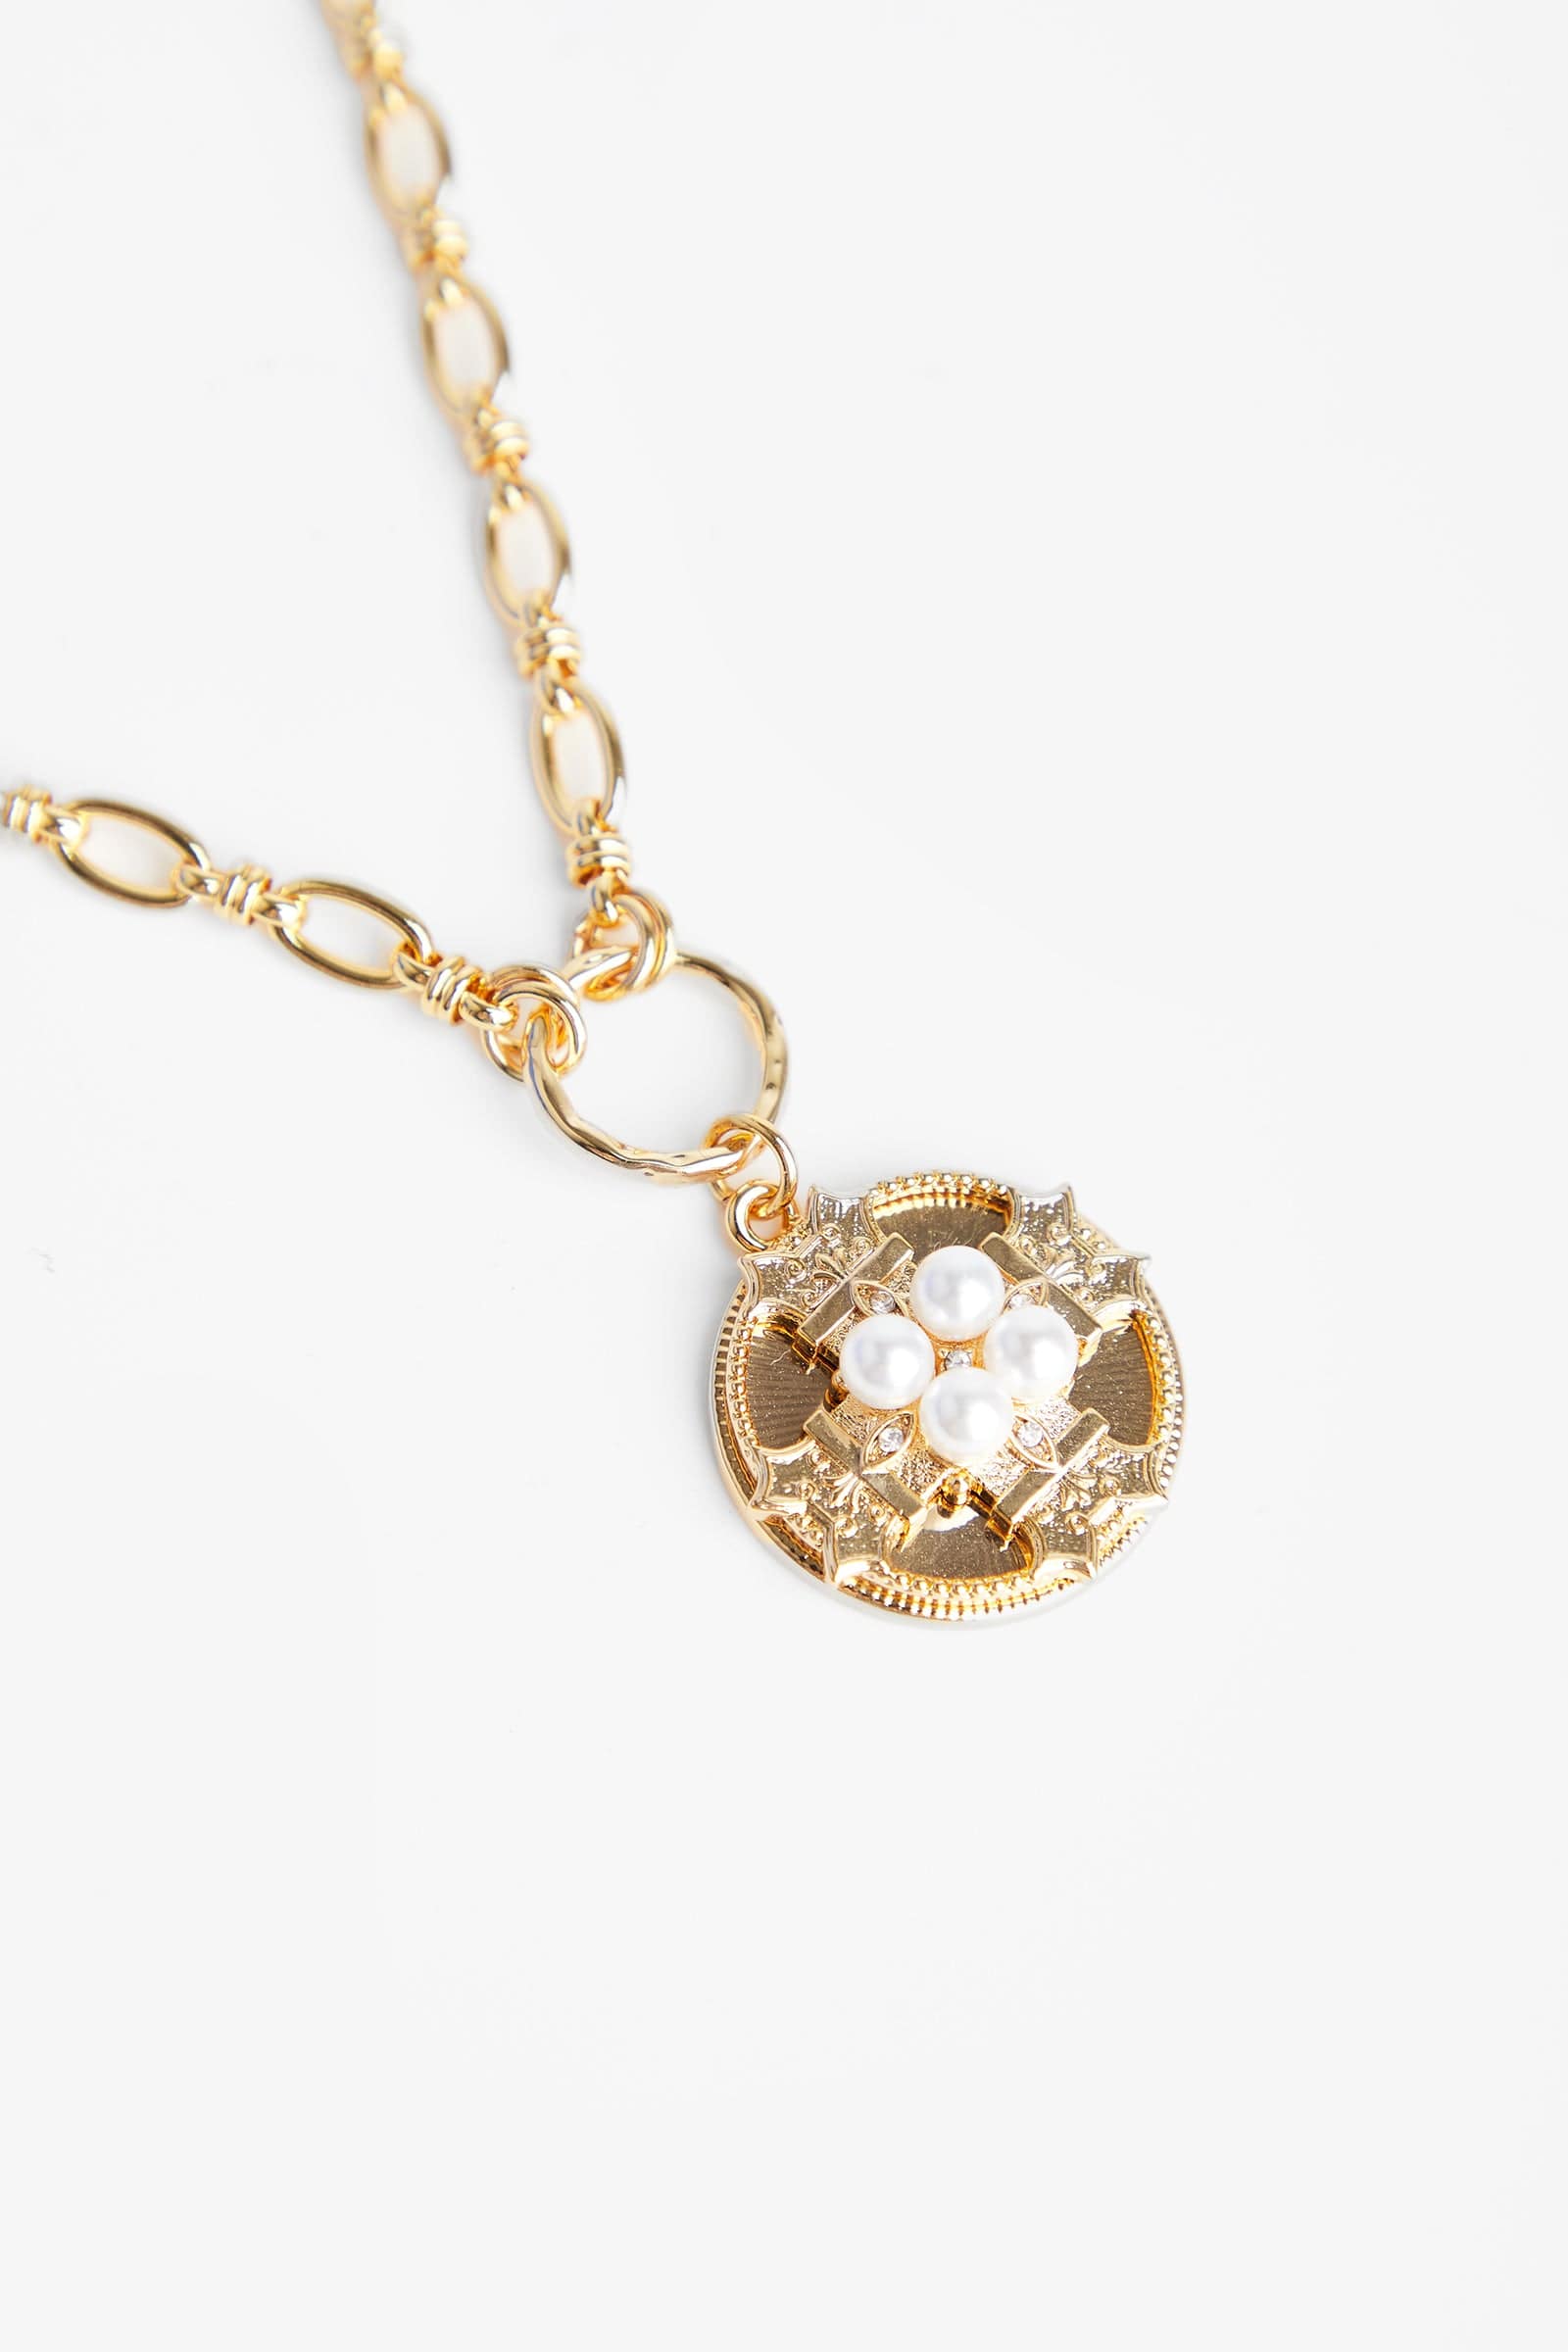 

Gold Pendant Chain Link Necklace